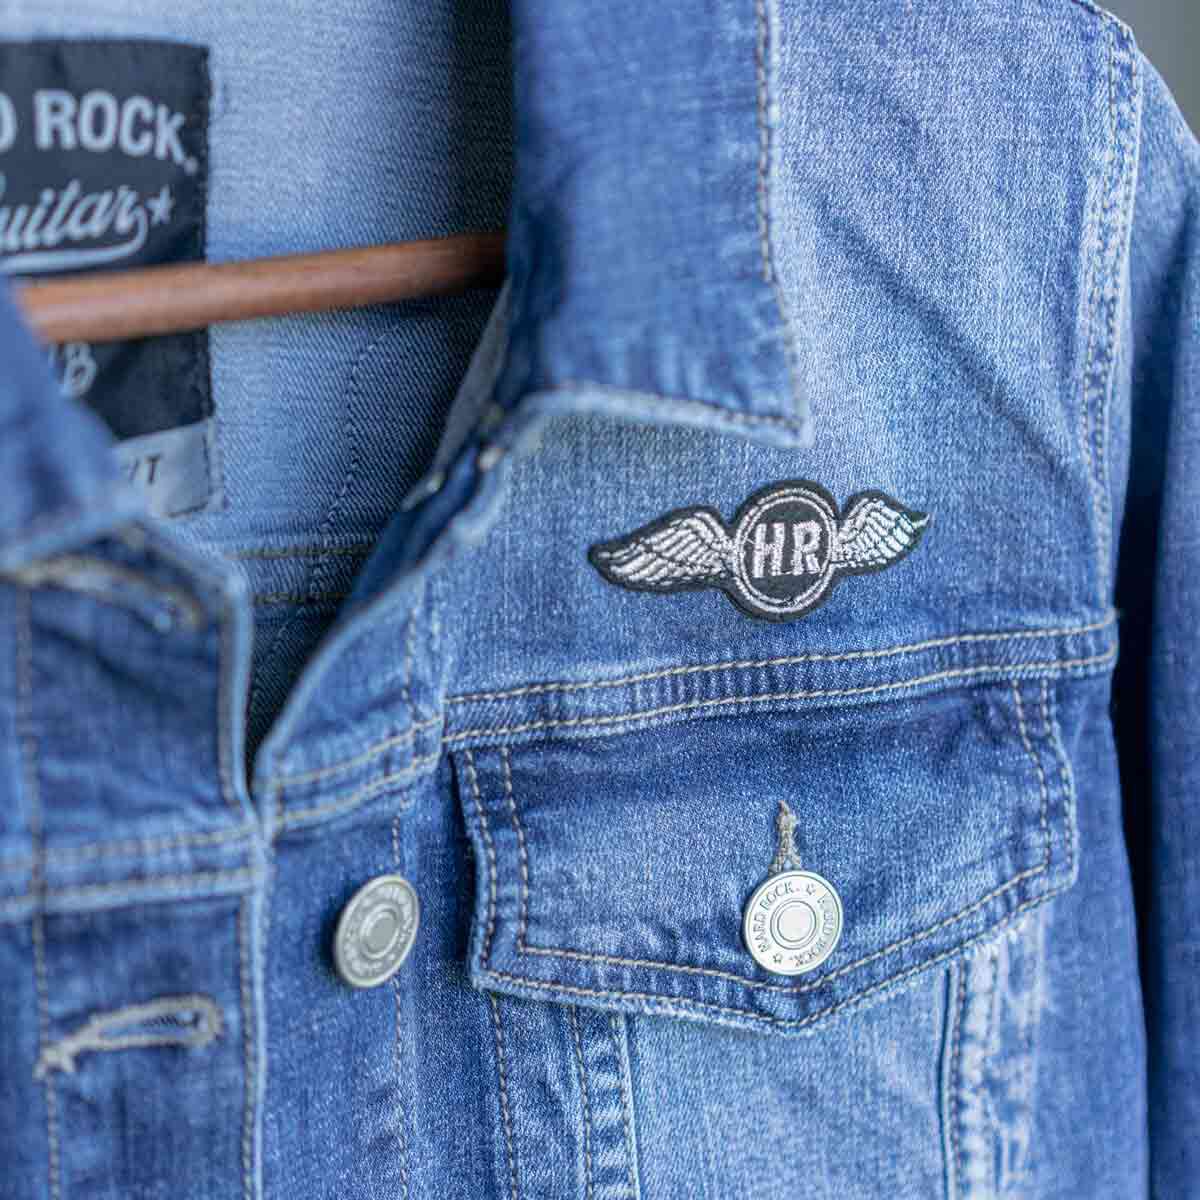 Sequin Wing Denim Jacket by Guitar Company